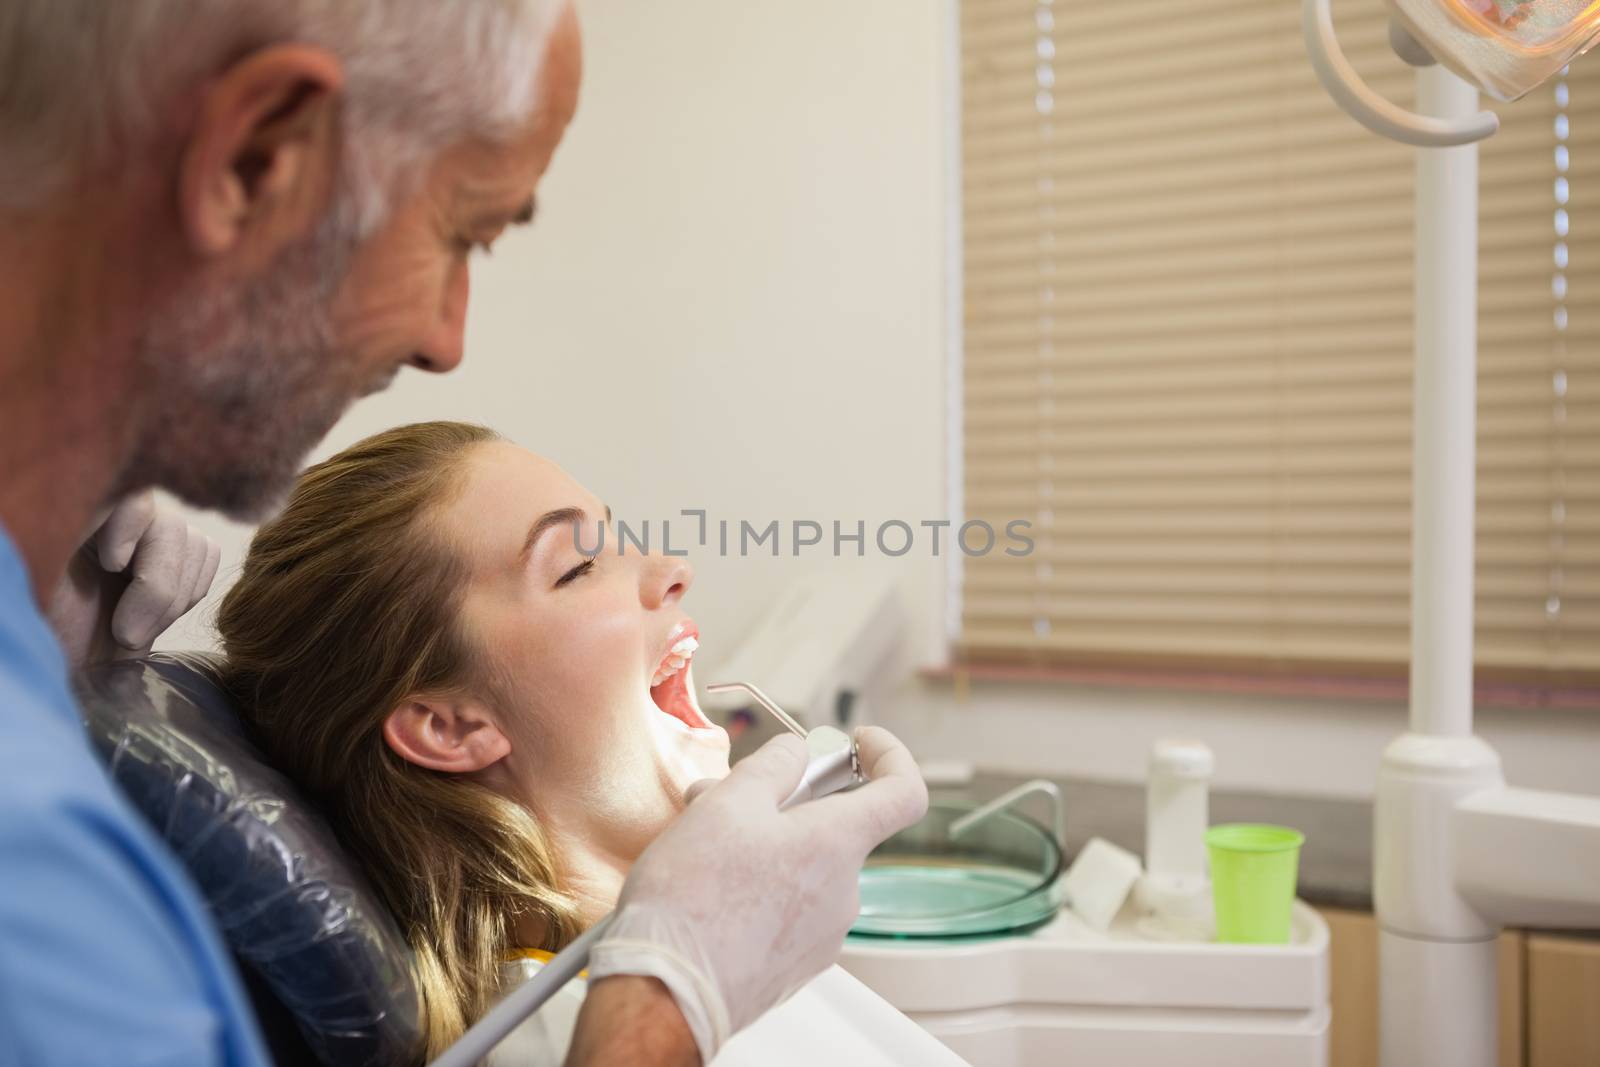 Dentist examining a patients teeth in the dentists chair under bright light at the dental clinic